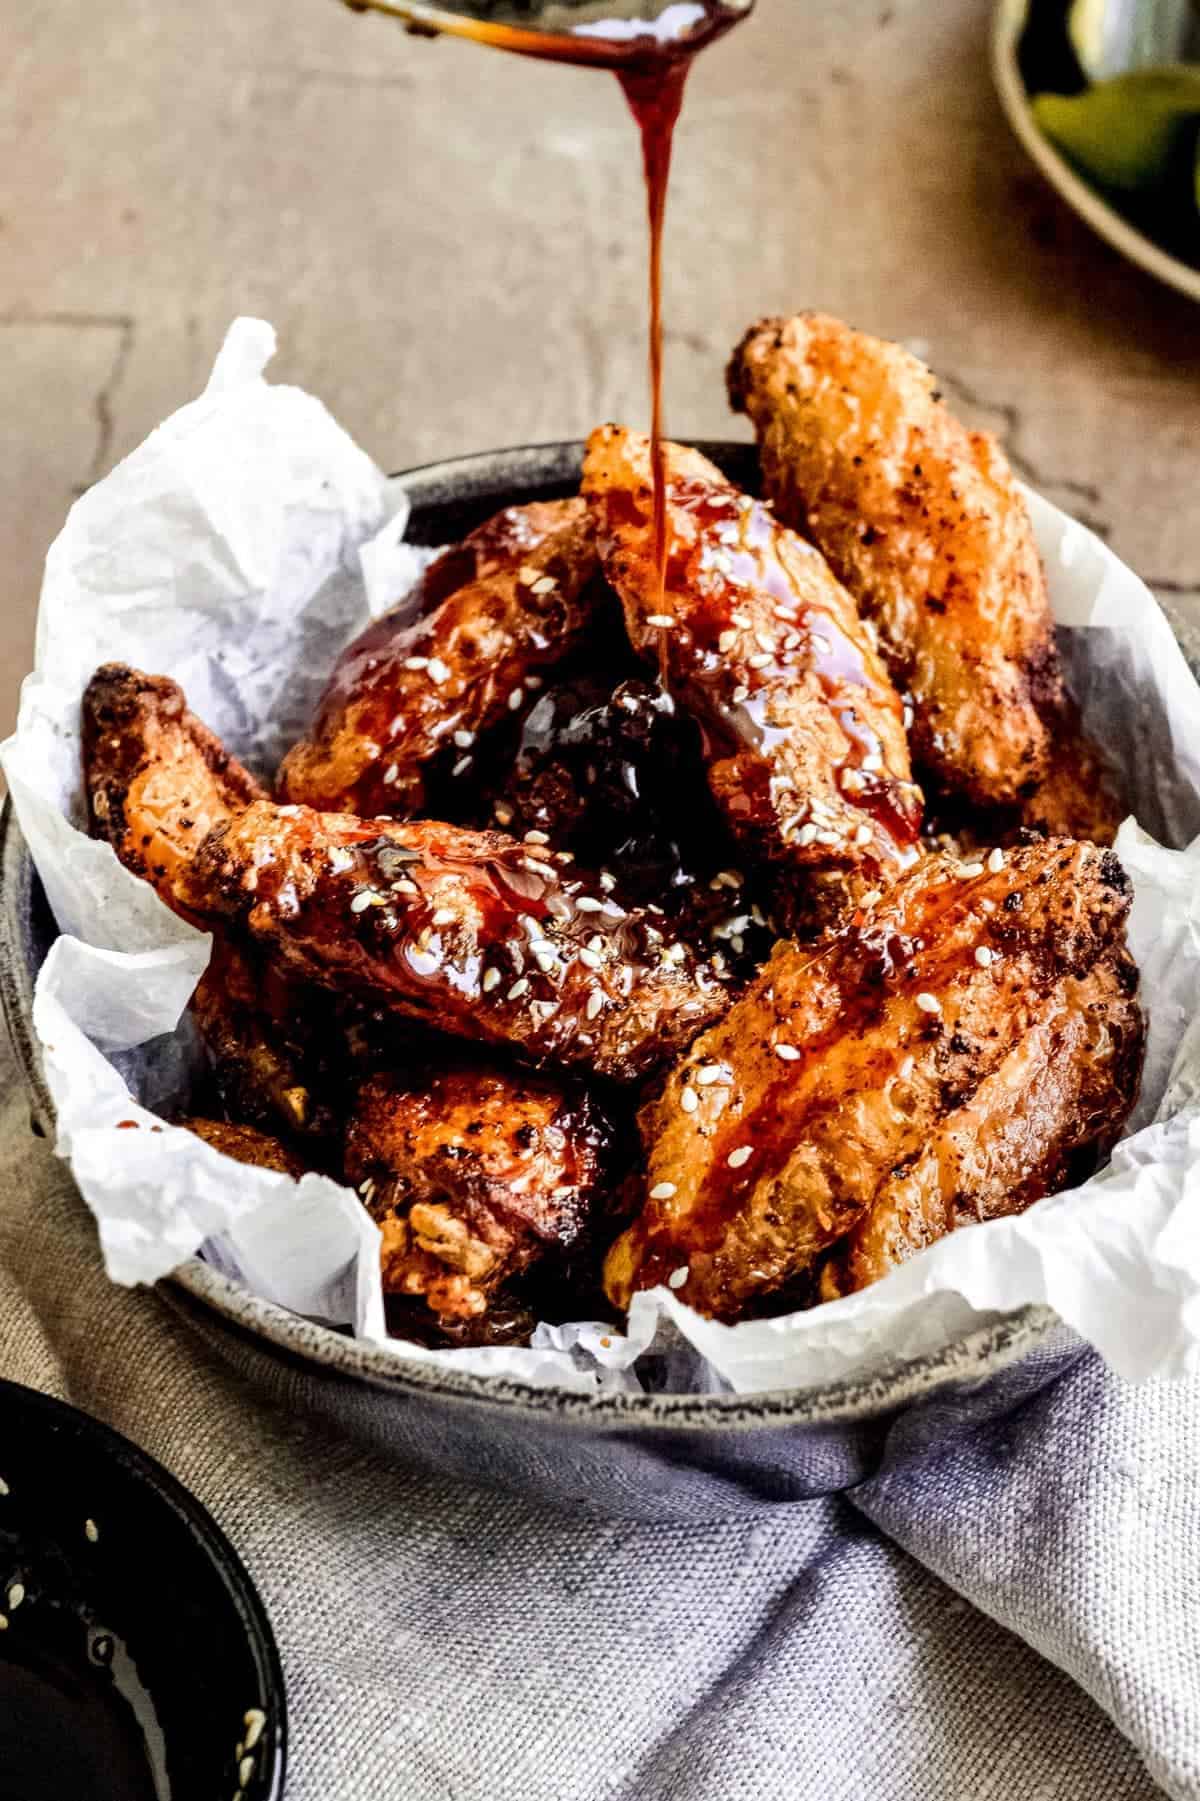 Sauce being poured on a basket of Soy Honey Glazed Chicken Wings